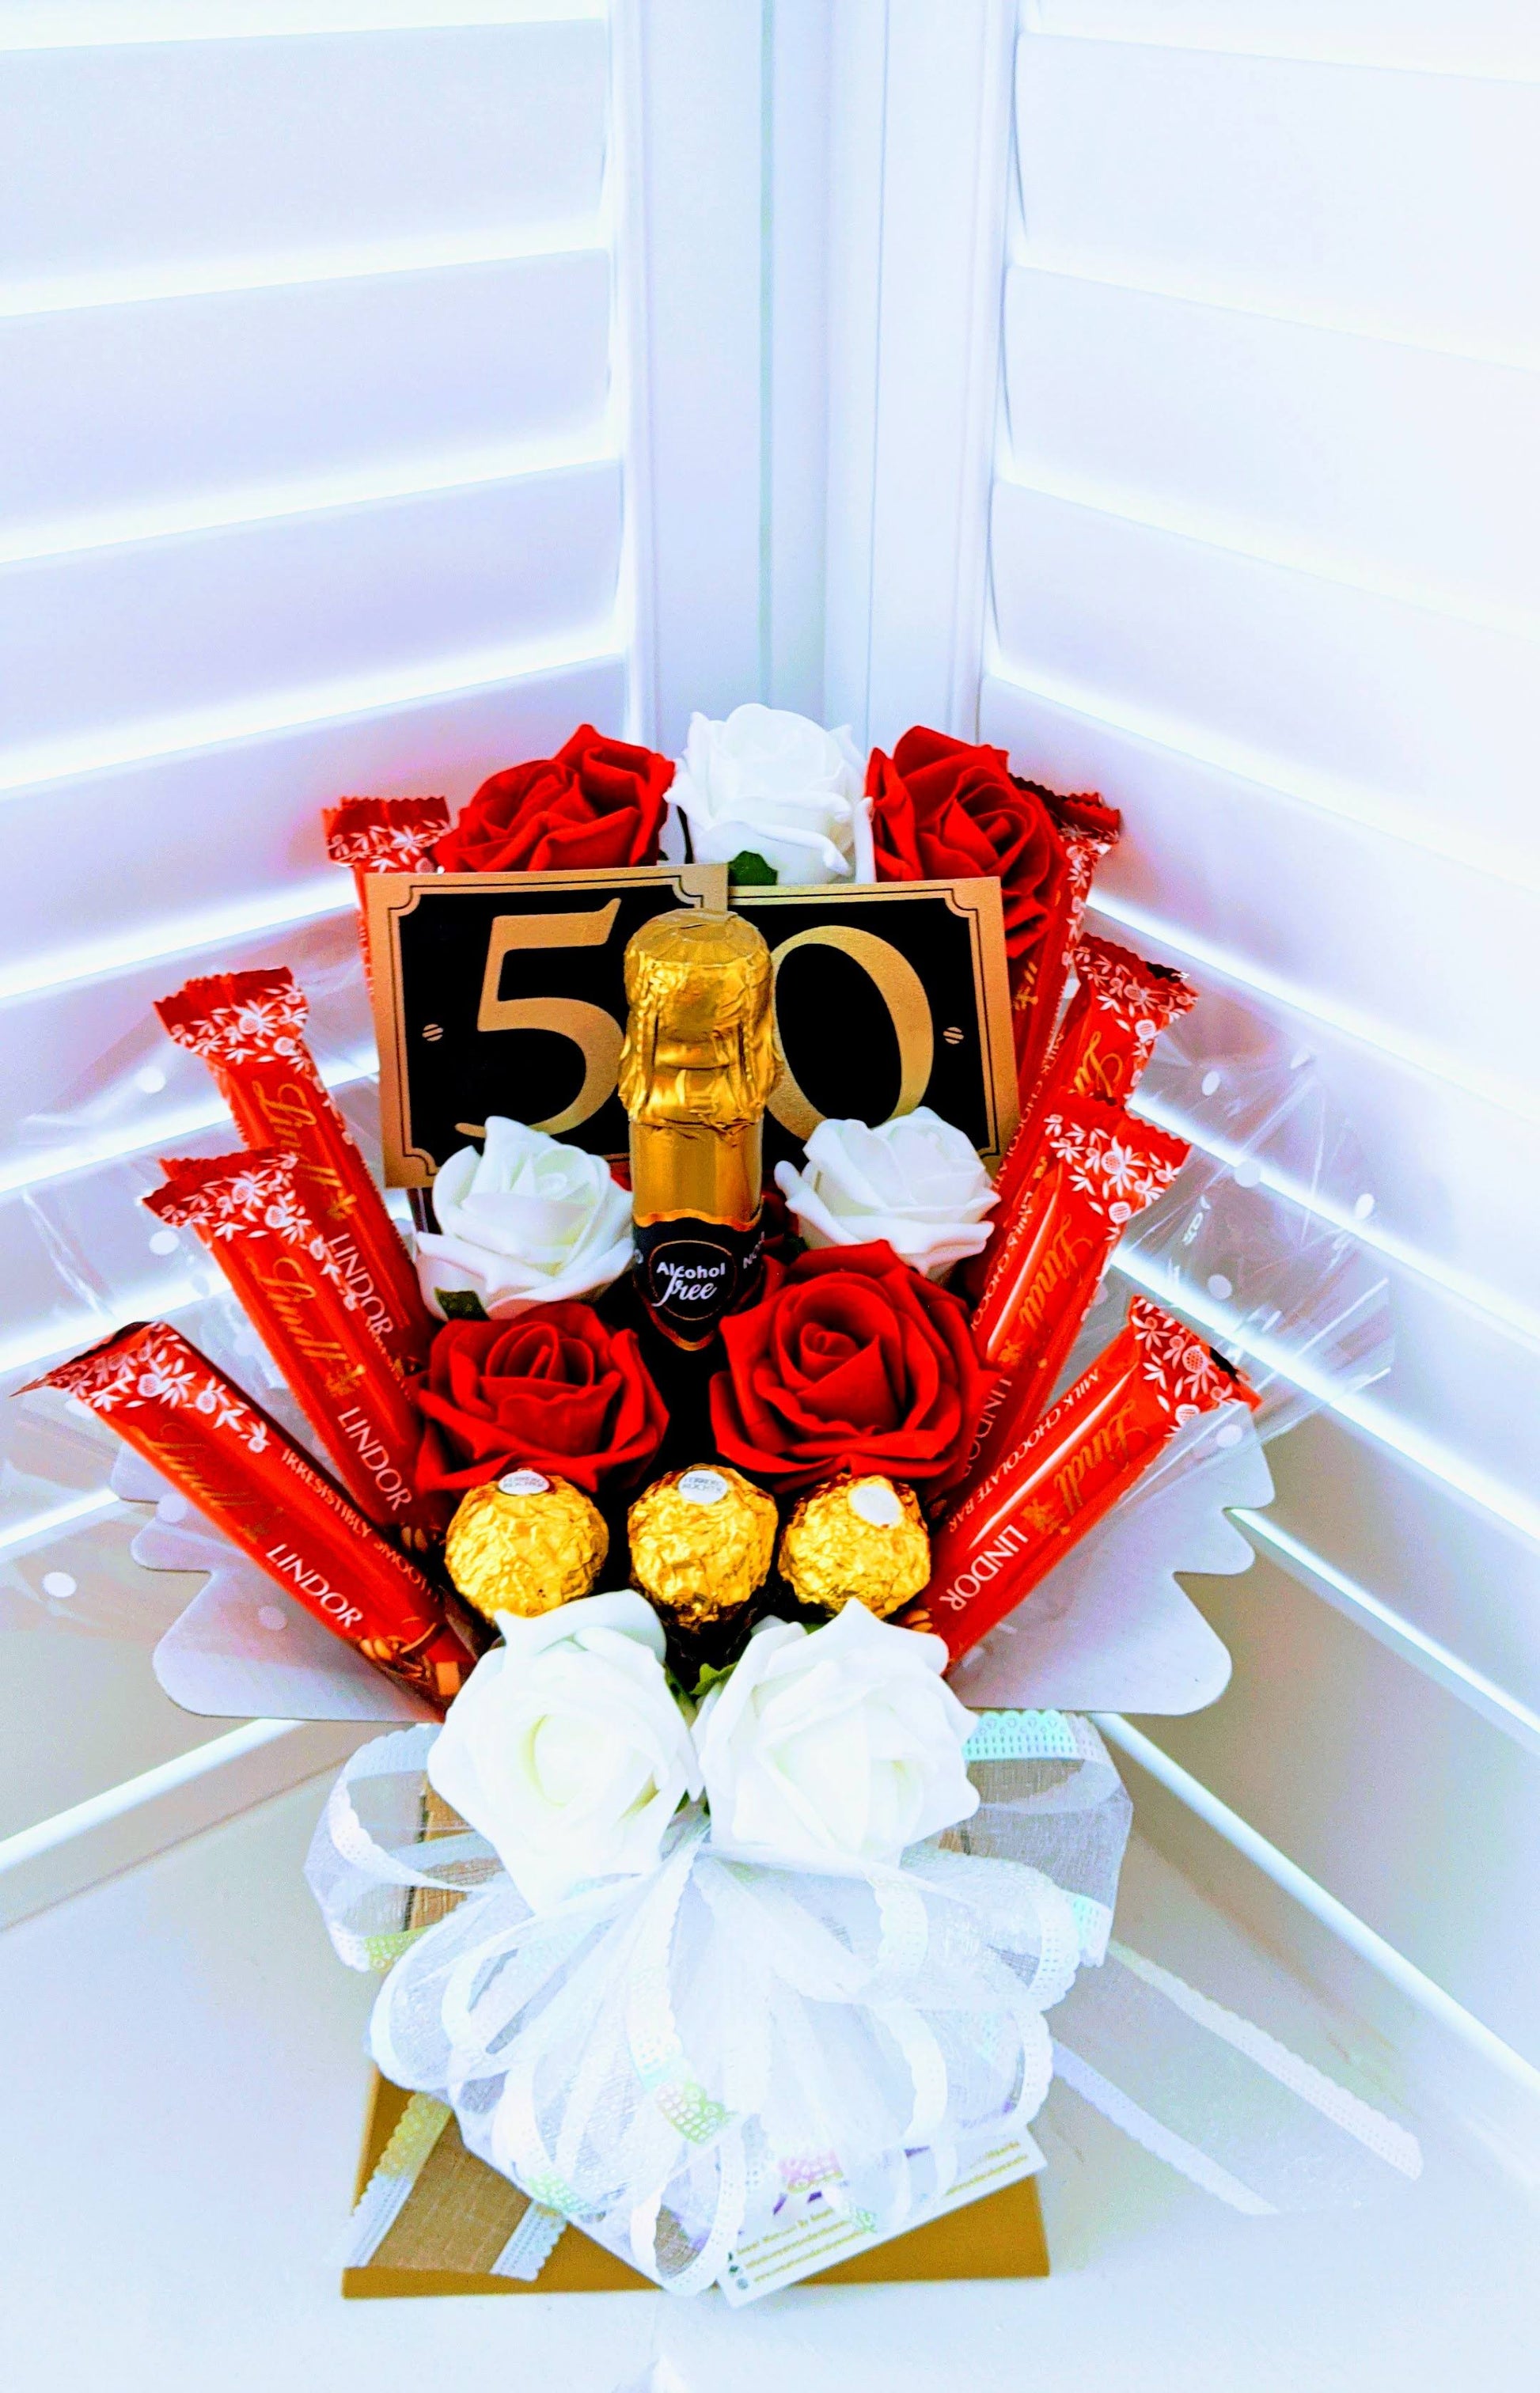 Chocolate Bouquets with customized message 